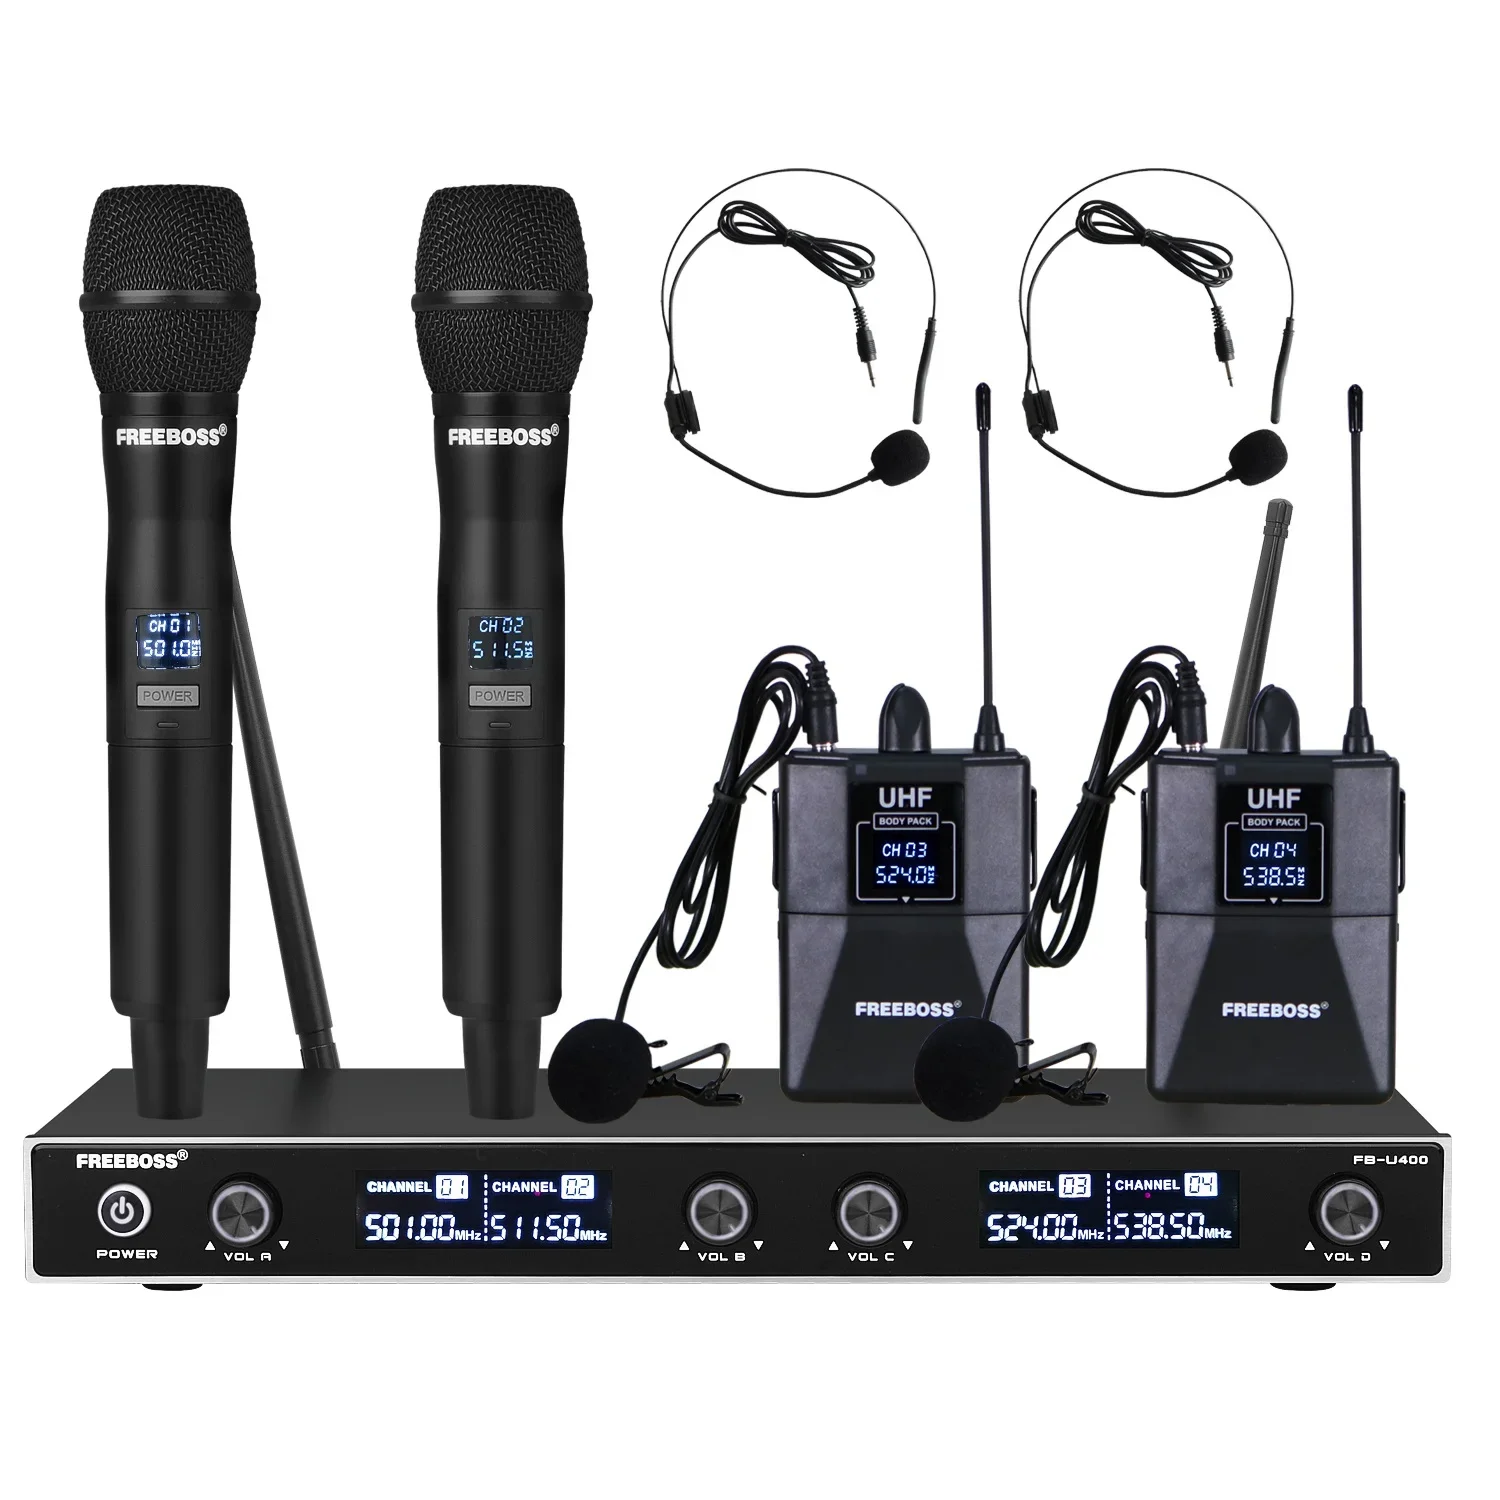 

FREEBOSS 4 Channel UHF Wireless Microphone System with 2 Bodypack and 2 Handheld 4 Mic for Karaoke Church Family Party FB-U400H2